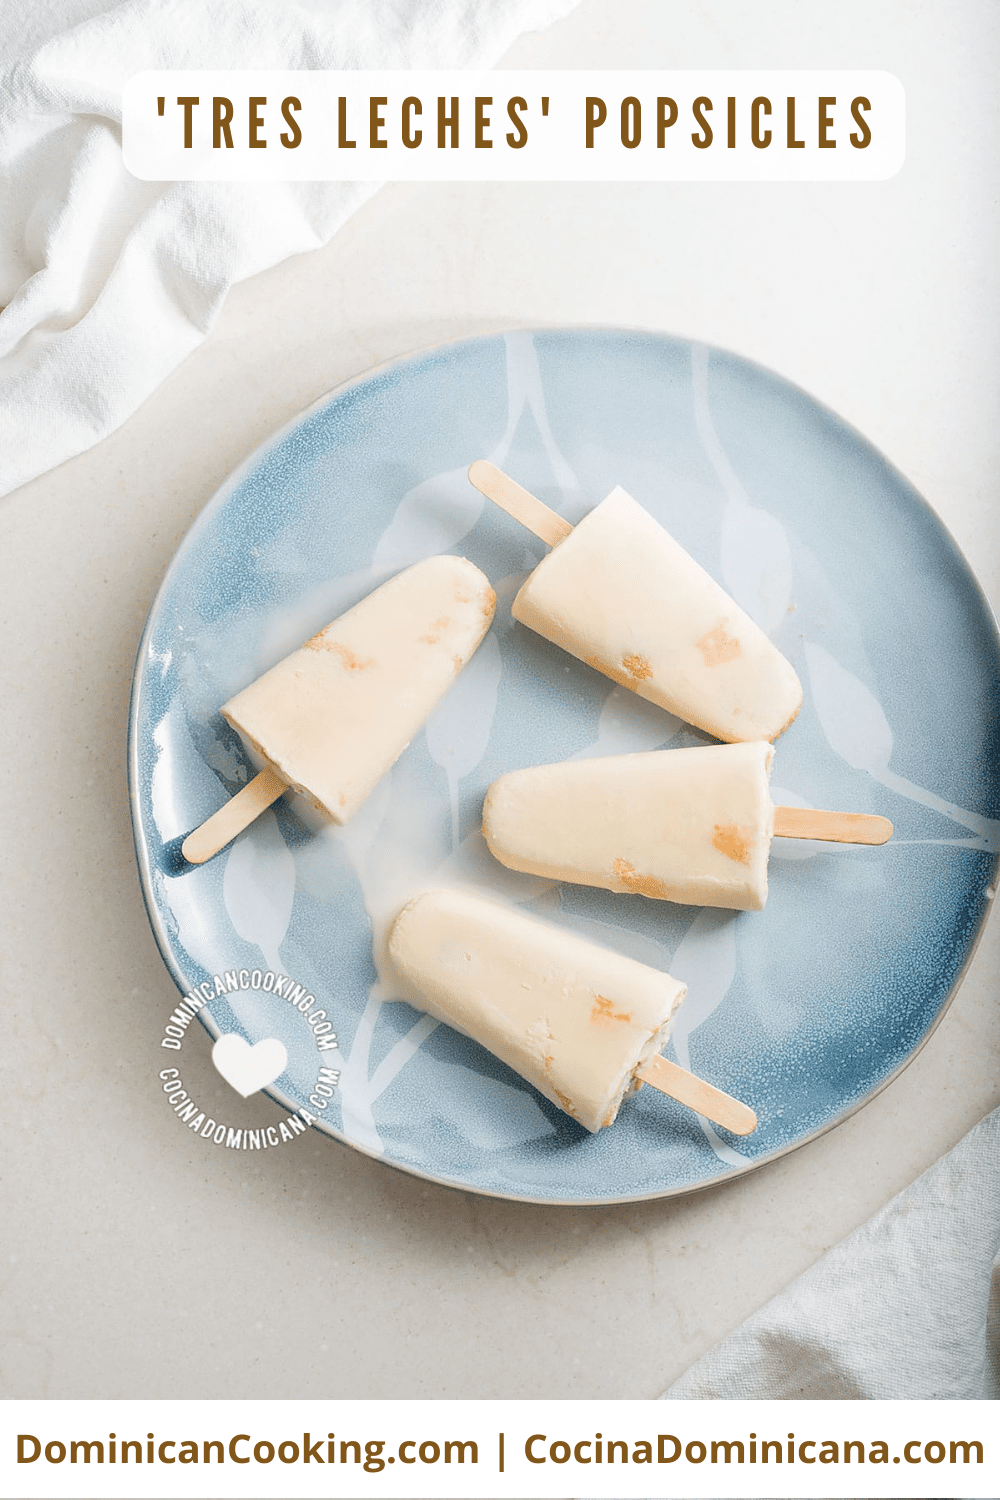 'Tres Leches' popsicles recipe.